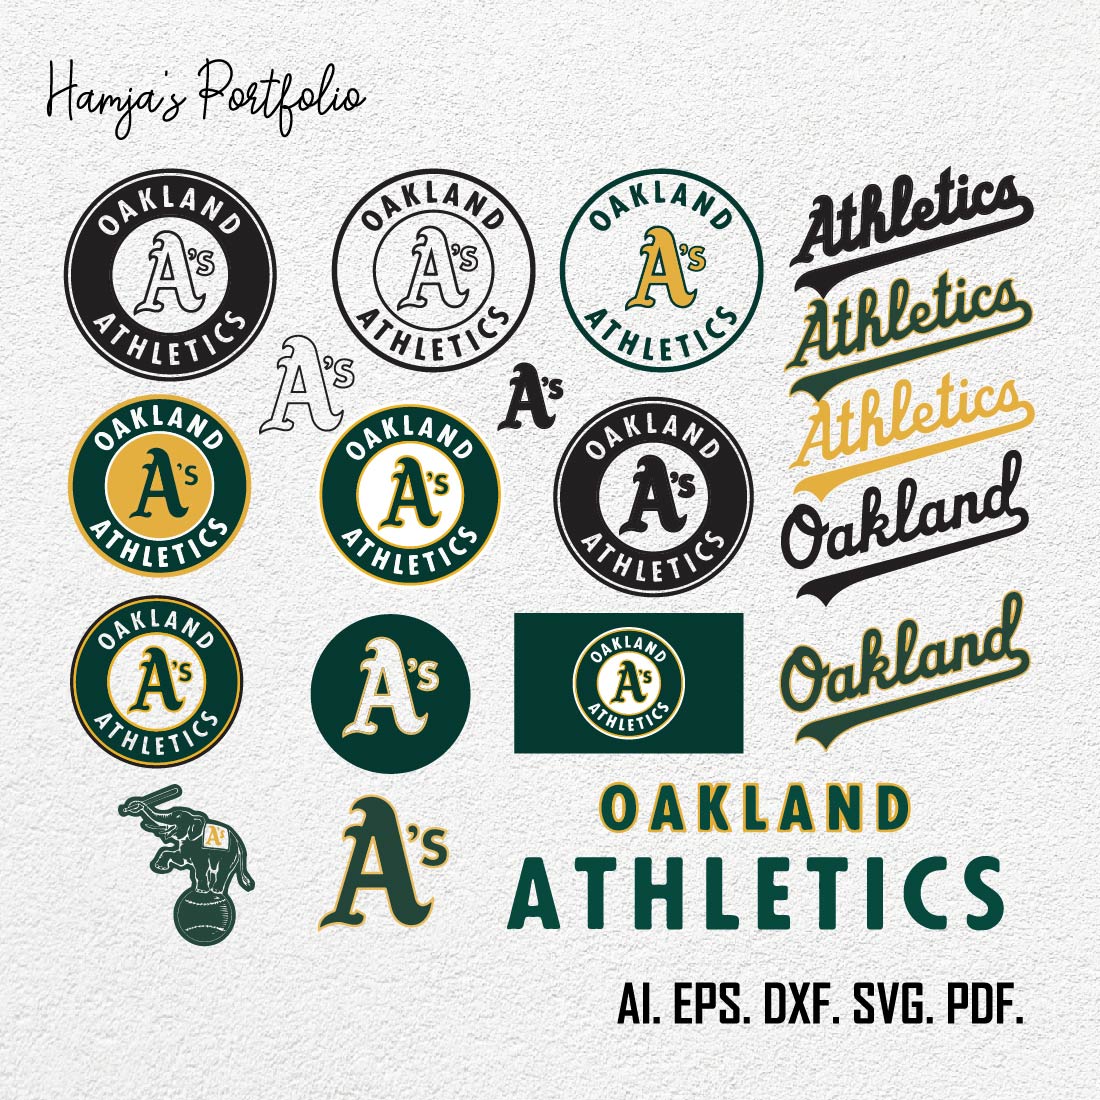 Oakland Athleticss SVG PNG, svg Sports files, Svg For Cricut, Clipart, baseball Cut File, Layered SVG For Cricut File cover image.